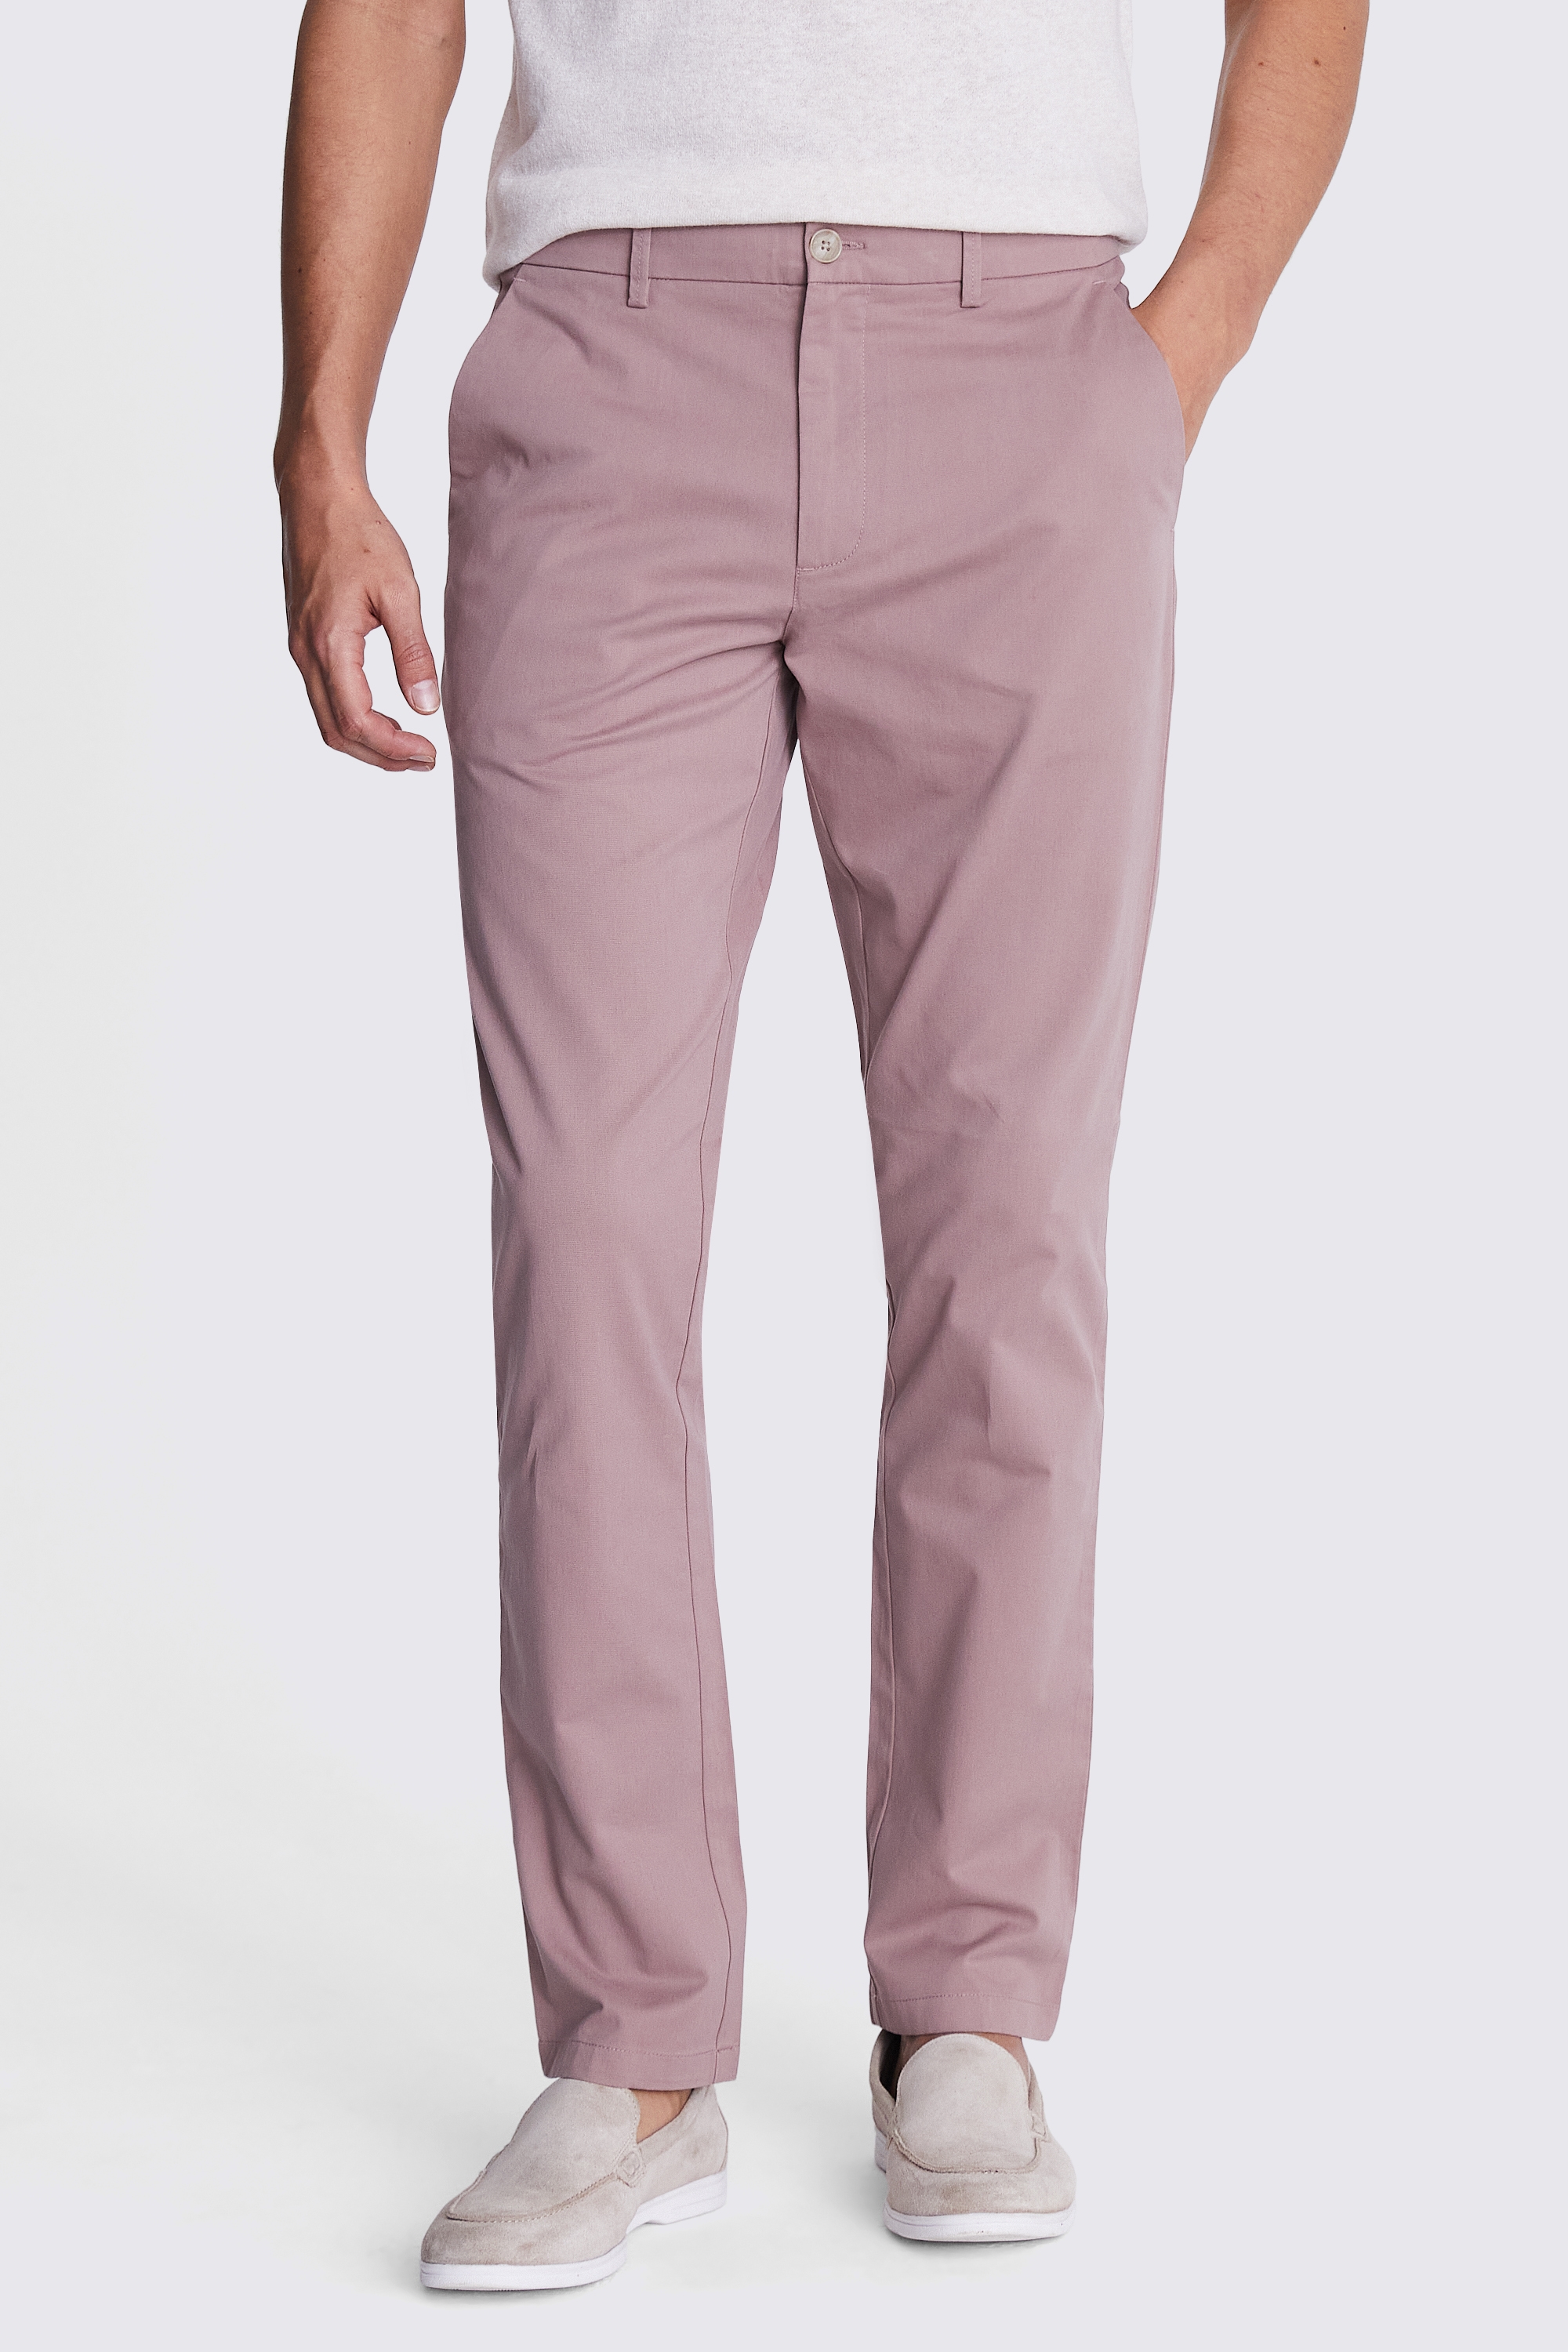 Tailored Fit Dusty Pink Stretch Chinos | Buy Online at Moss